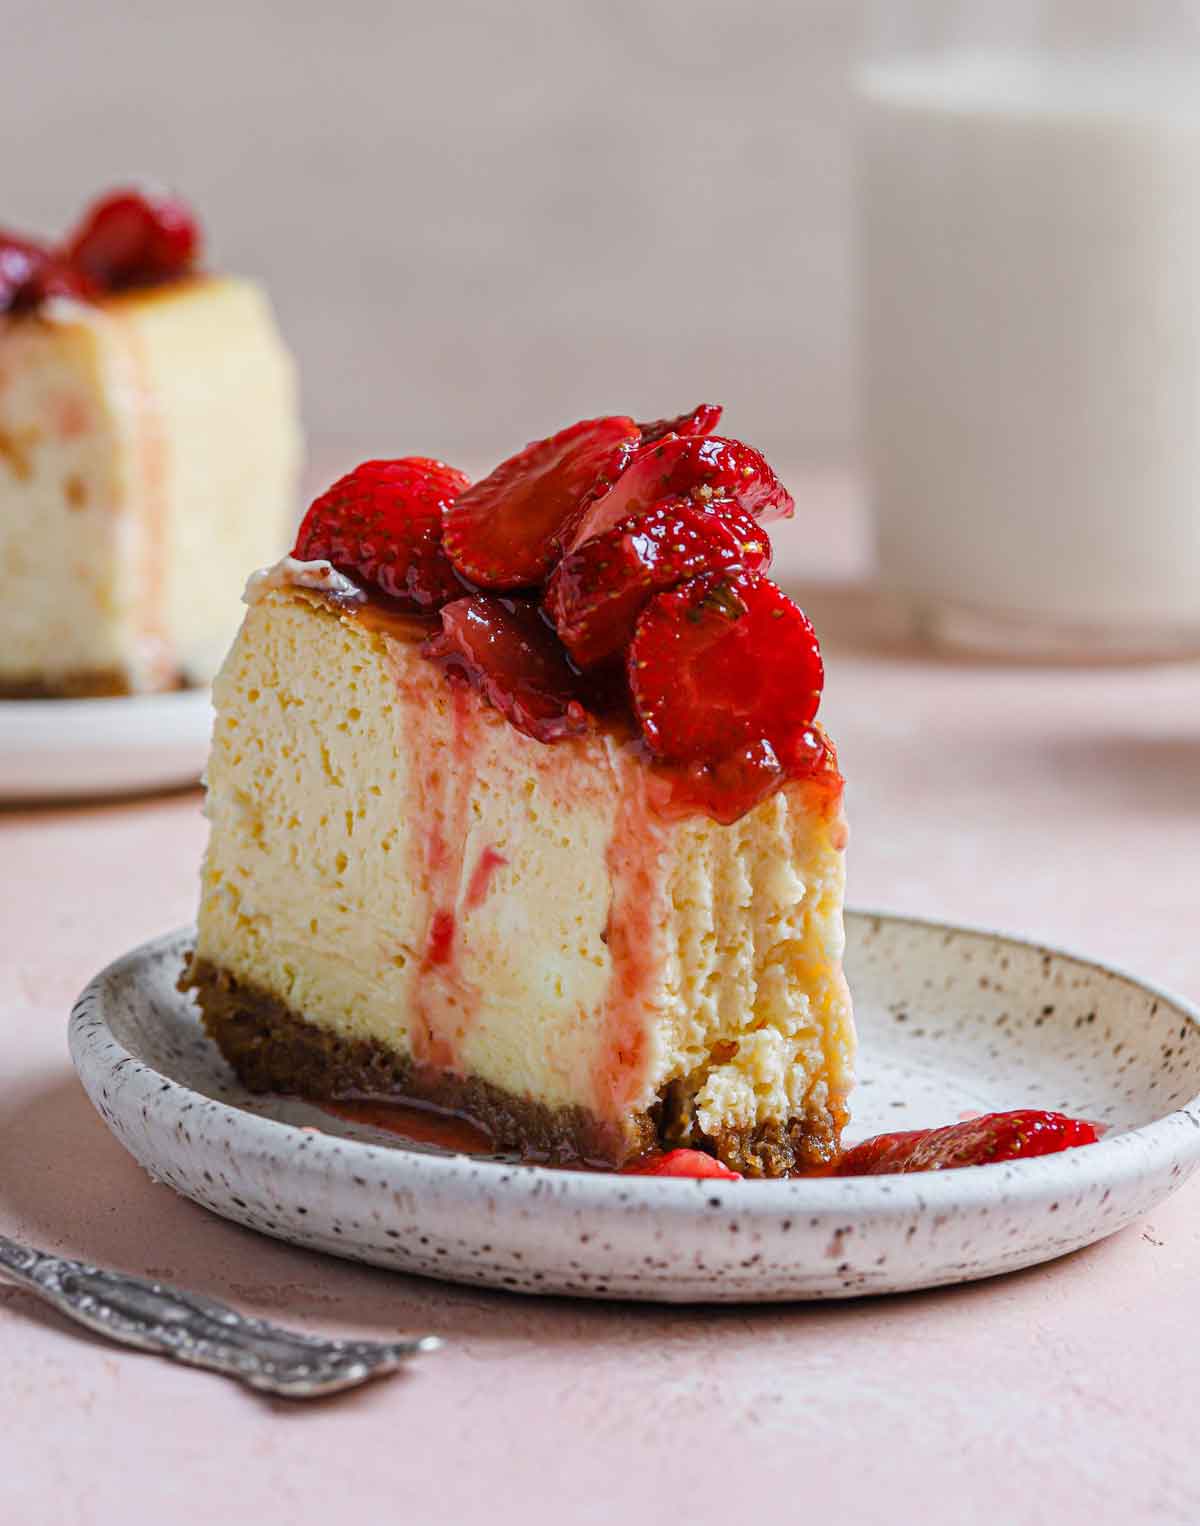 Slice of New York cheesecake with strawberry topping on a white and black speckled plate.